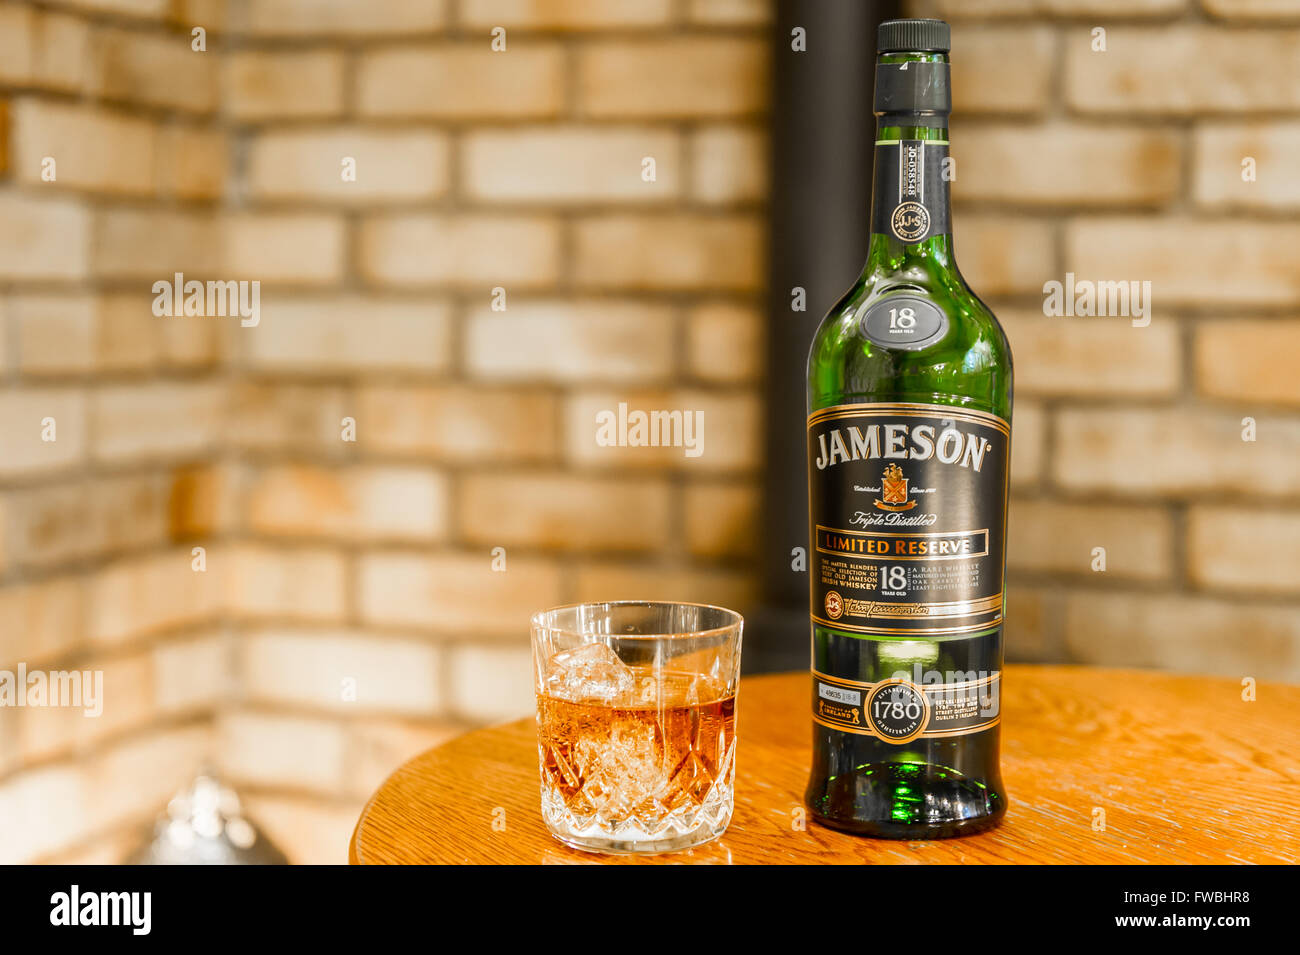 Bottle of 18 year old Jameson triple distilled limited reserve Irish whiskey with a glass of the whiskey with ice cubes on a table with copy space. Stock Photo